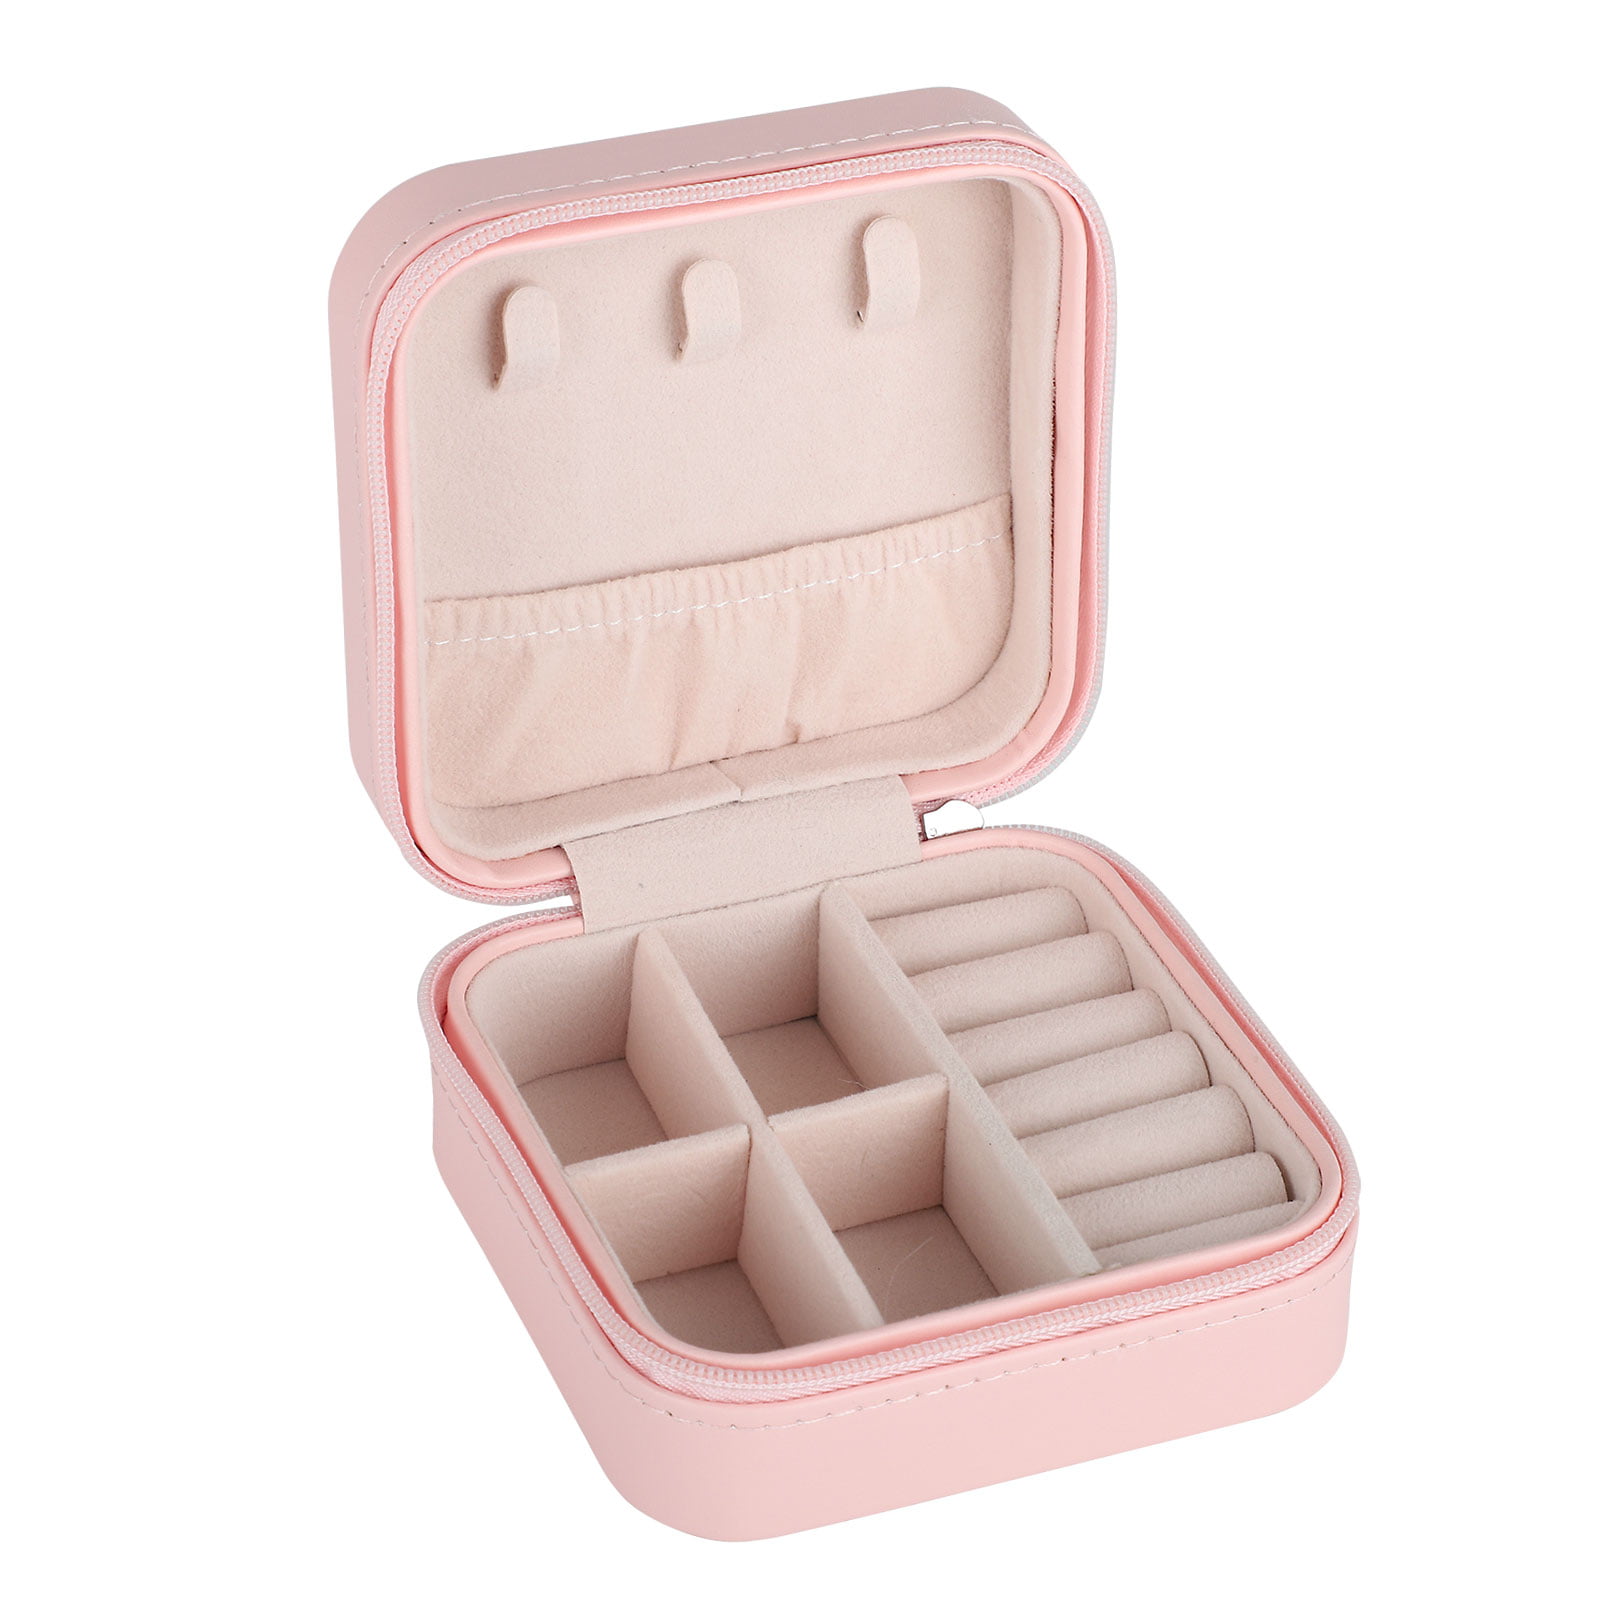 PU Leather Jewelry Boxes Portable Cute Designed Mini Casket Travel Storage Cases 